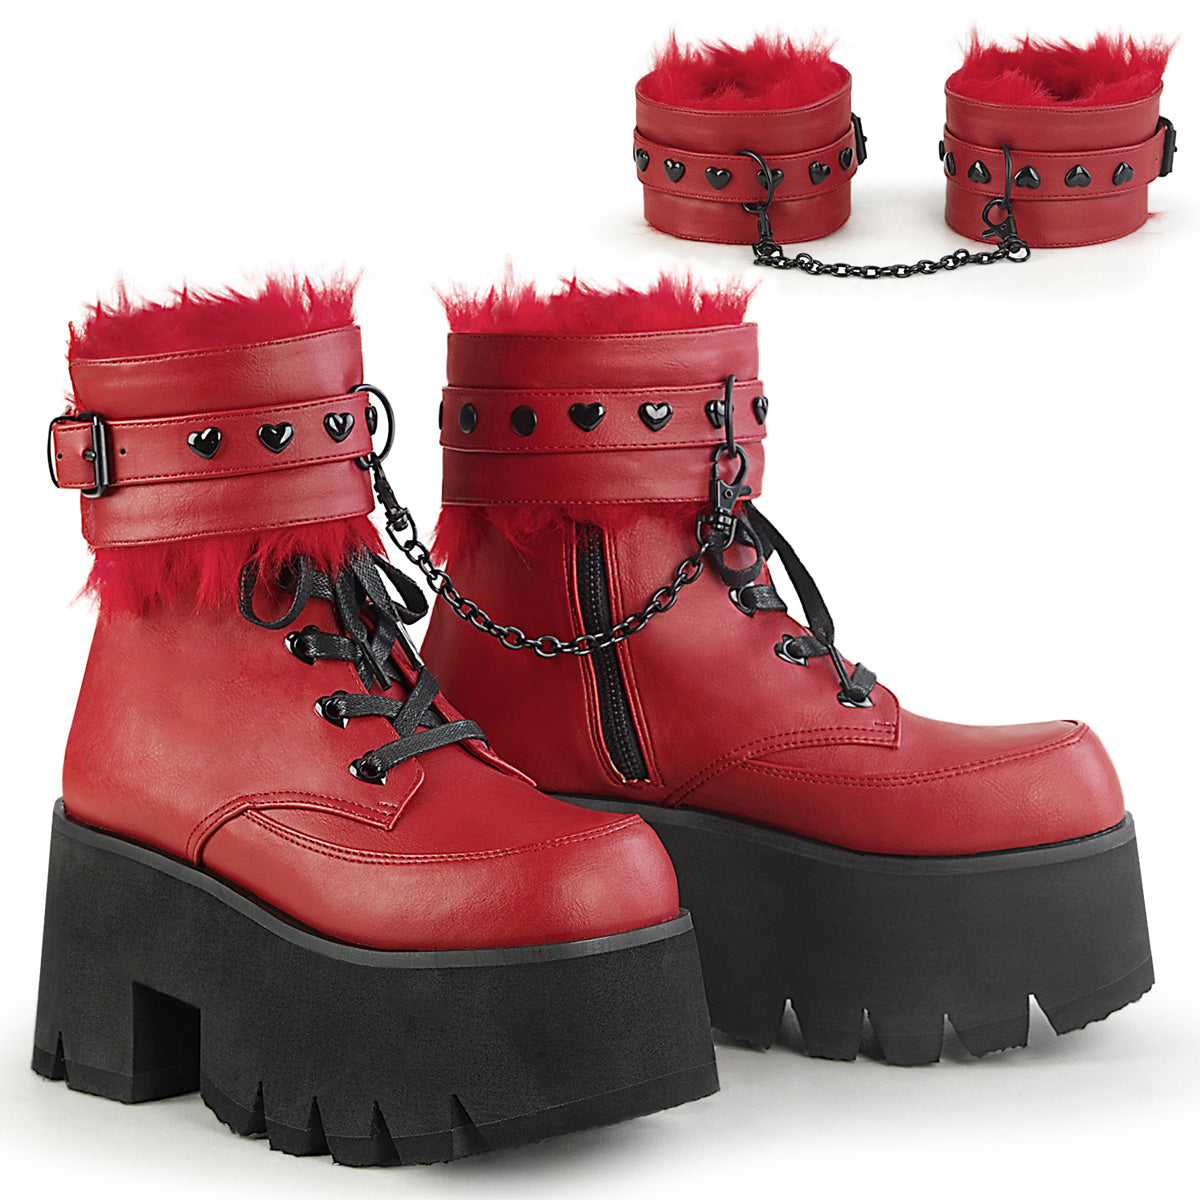 ASHES-57 Alternative Footwear Demonia Women's Ankle Boots Red Vegan Leather